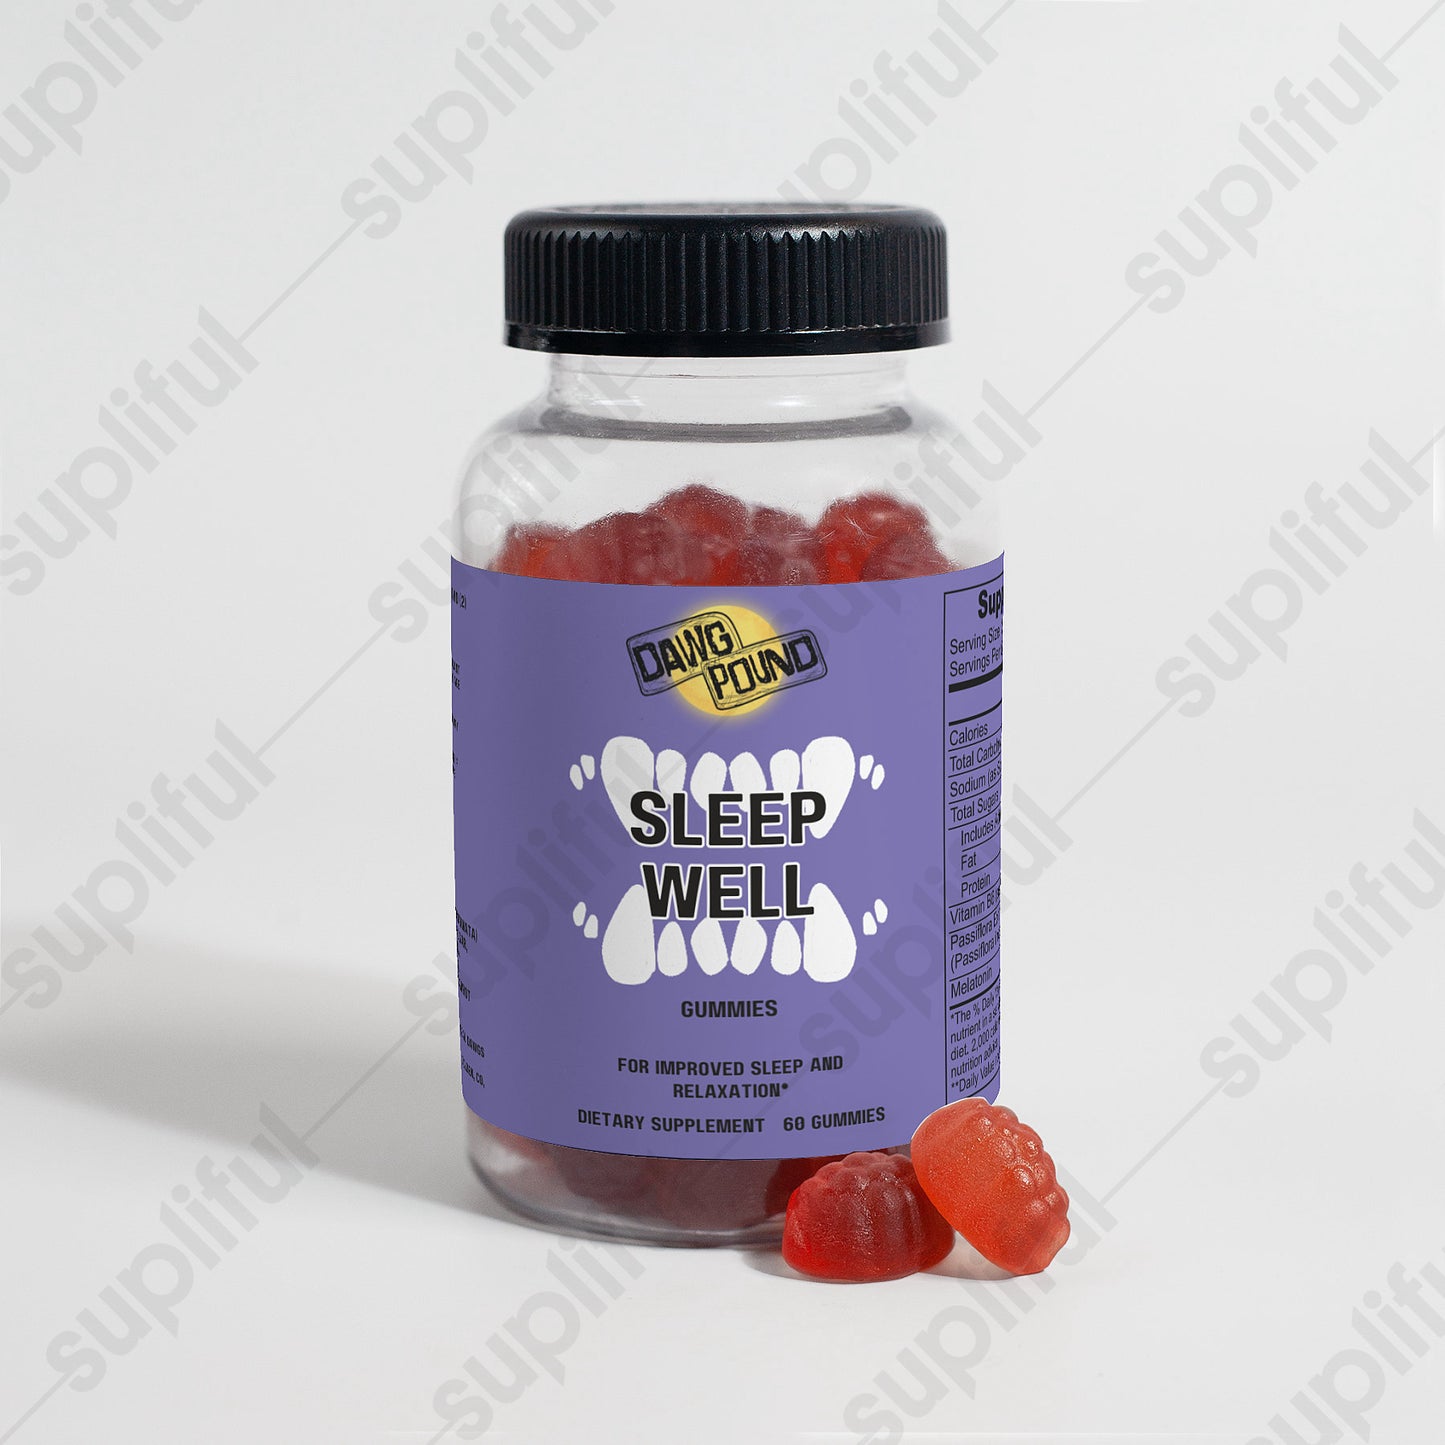 Dawg Pound Sleep Well Supplement Gummies - Front View with Gummies Shown in Front